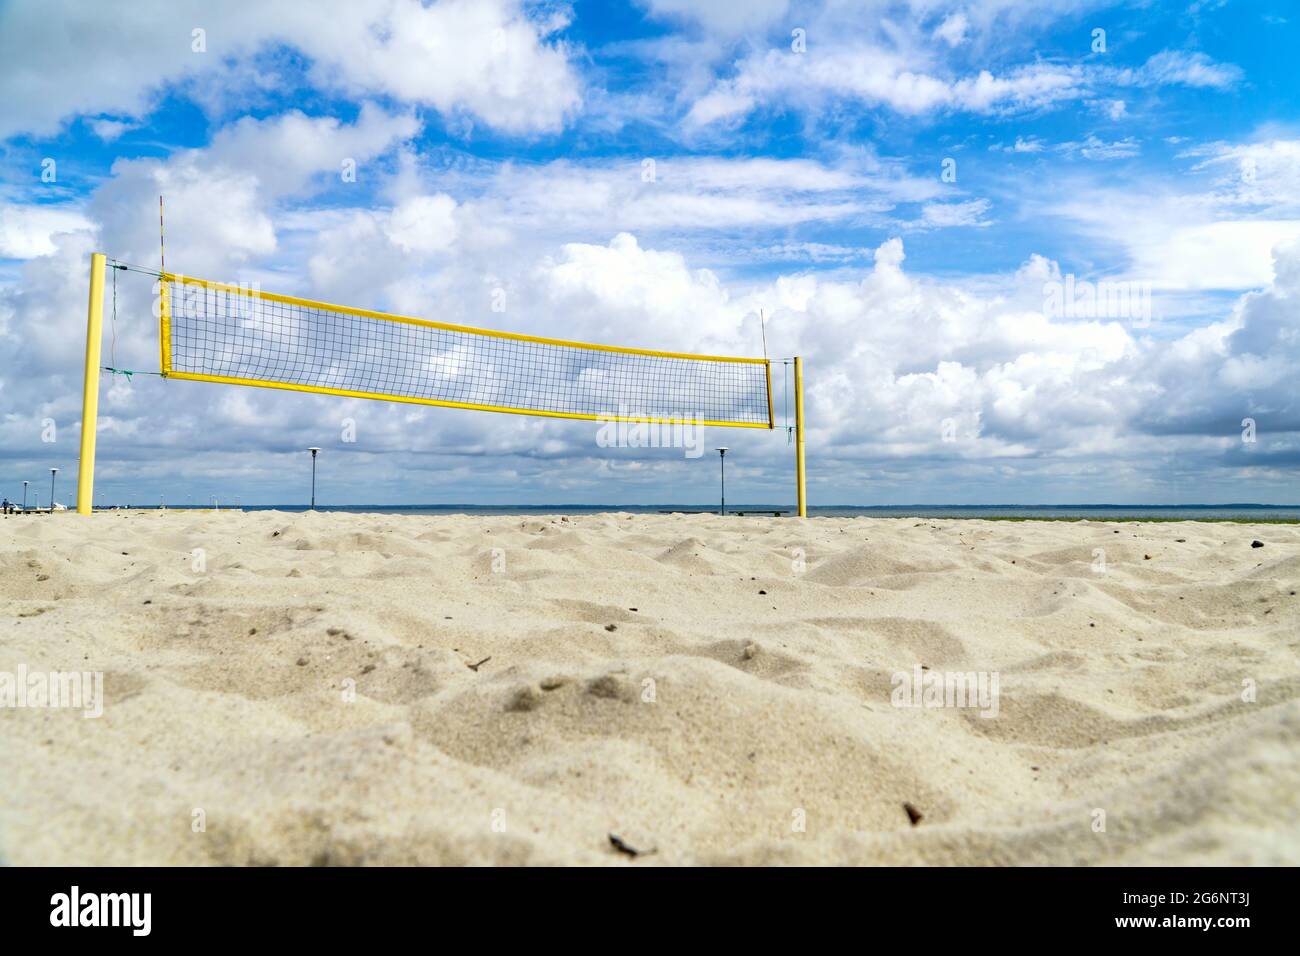 Volleyball net on the seaside beach with white clouds on blue sky Stock Photo